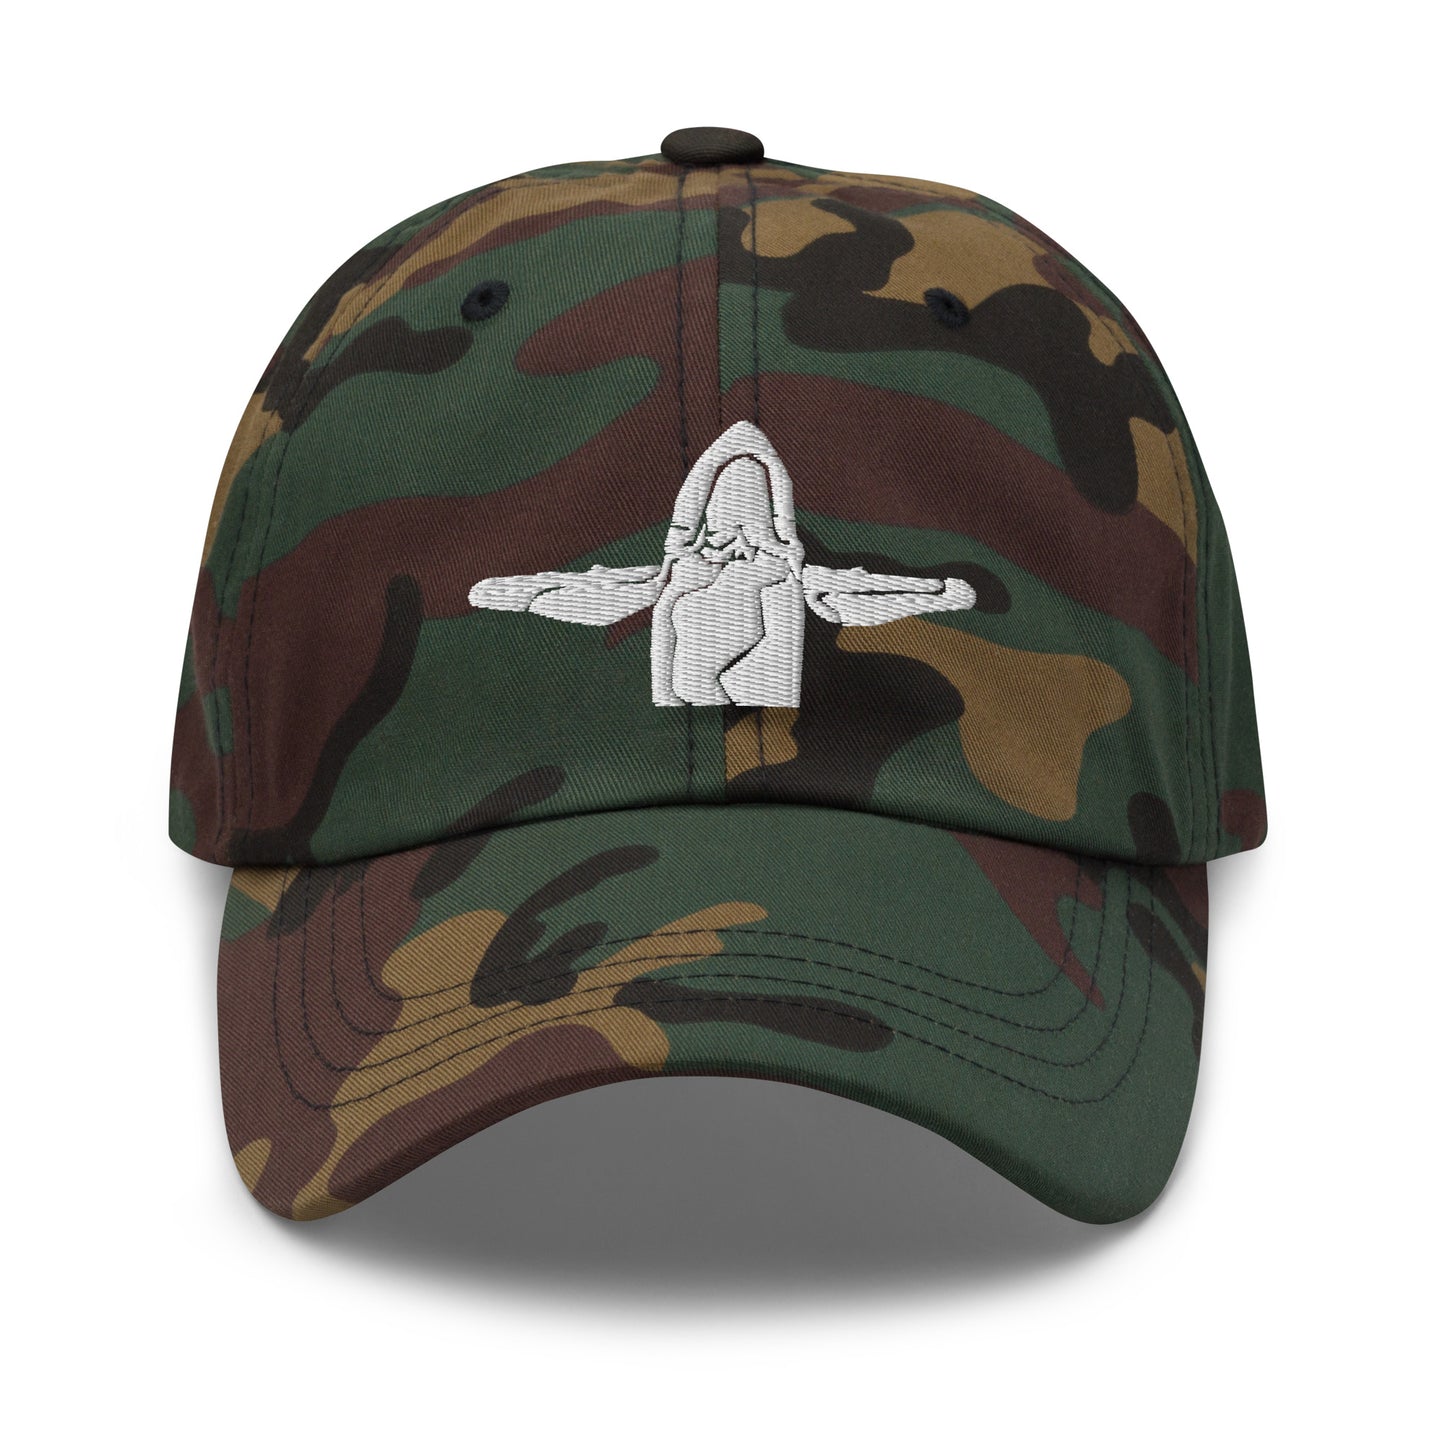 Epic Sacred Whale Dad hat